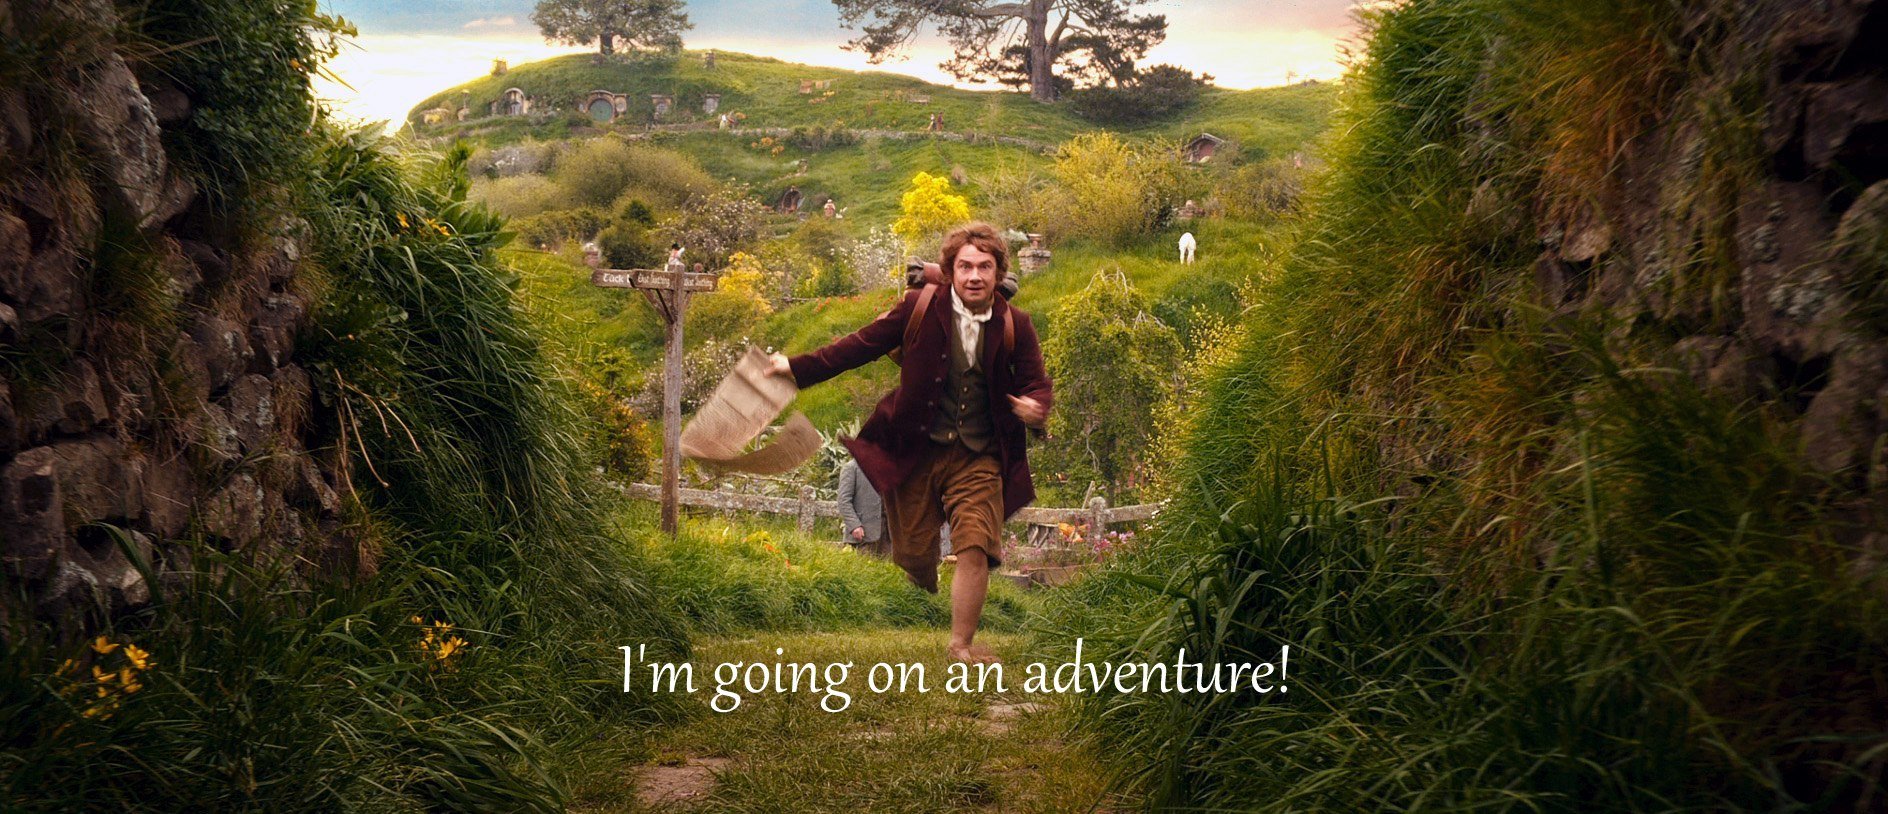 bilbo-baggins-i-am-going-on-an-adventure-in-the-hobbit-an-unexpected-journey